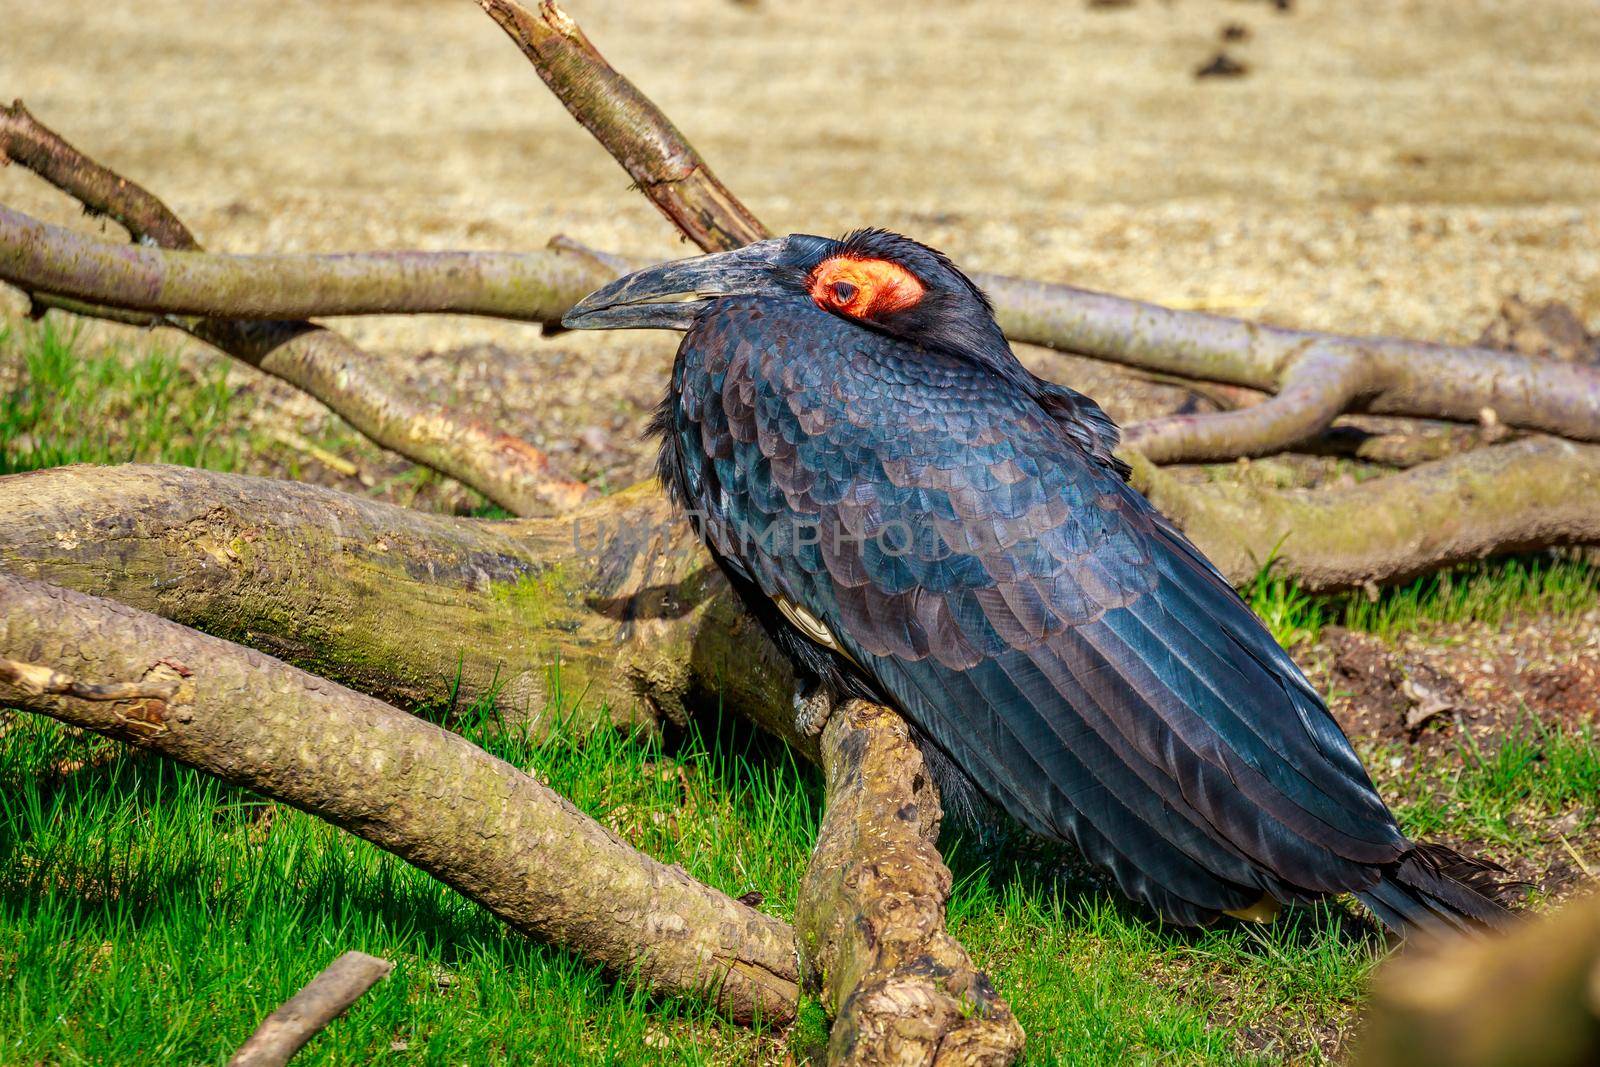 A Southern Ground Hornbill perches on the ground.